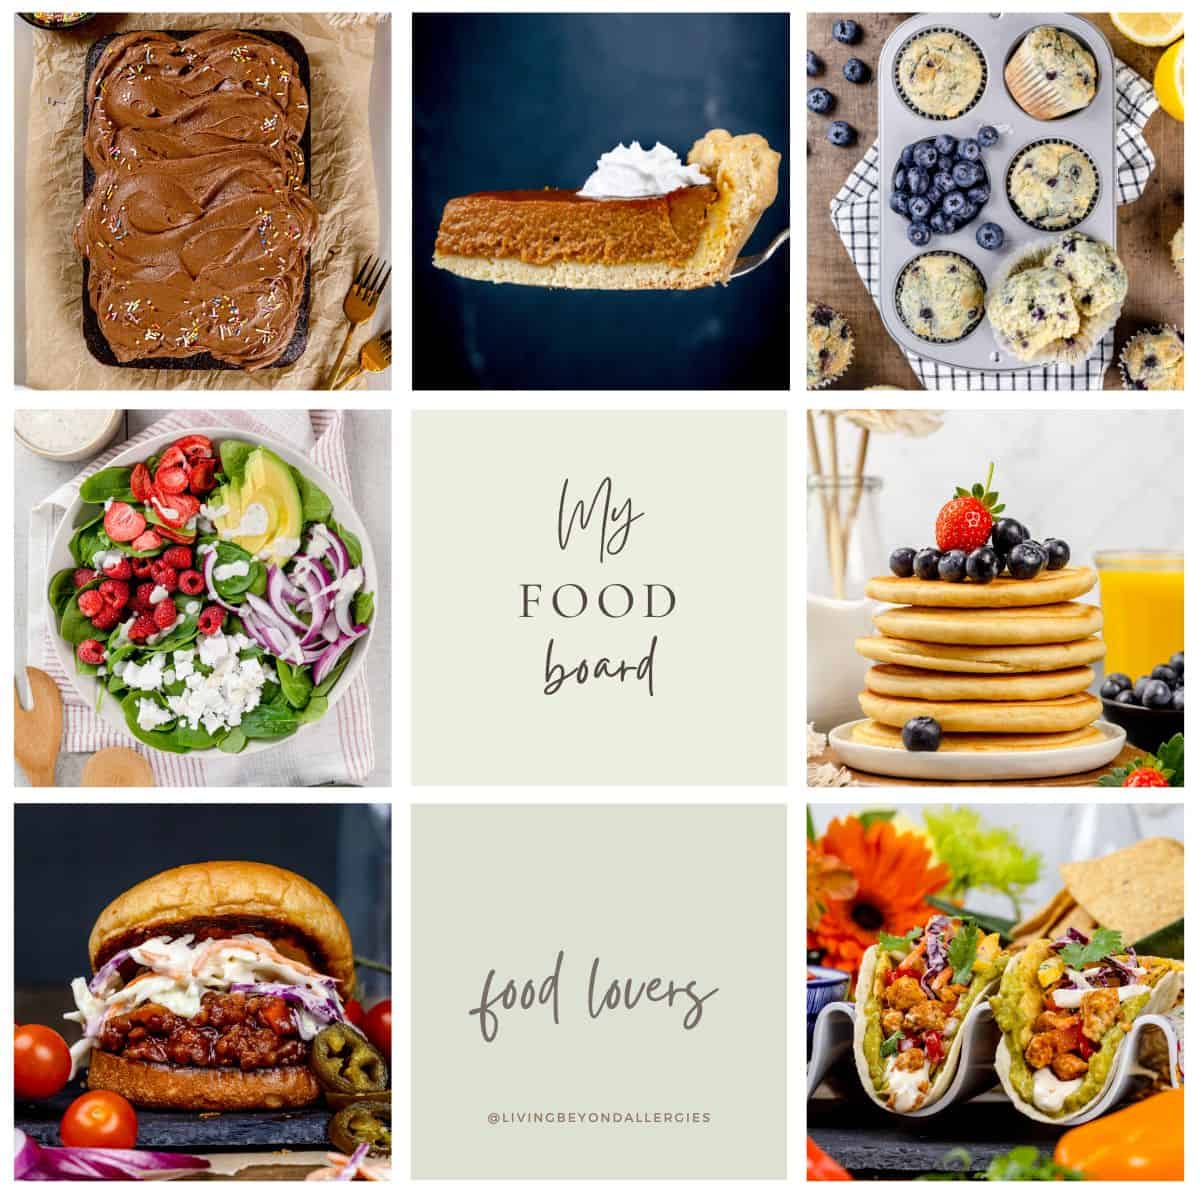 Collage of 7 images of different foods from the blog. Text on the image reads, "my food board" and "food lovers".